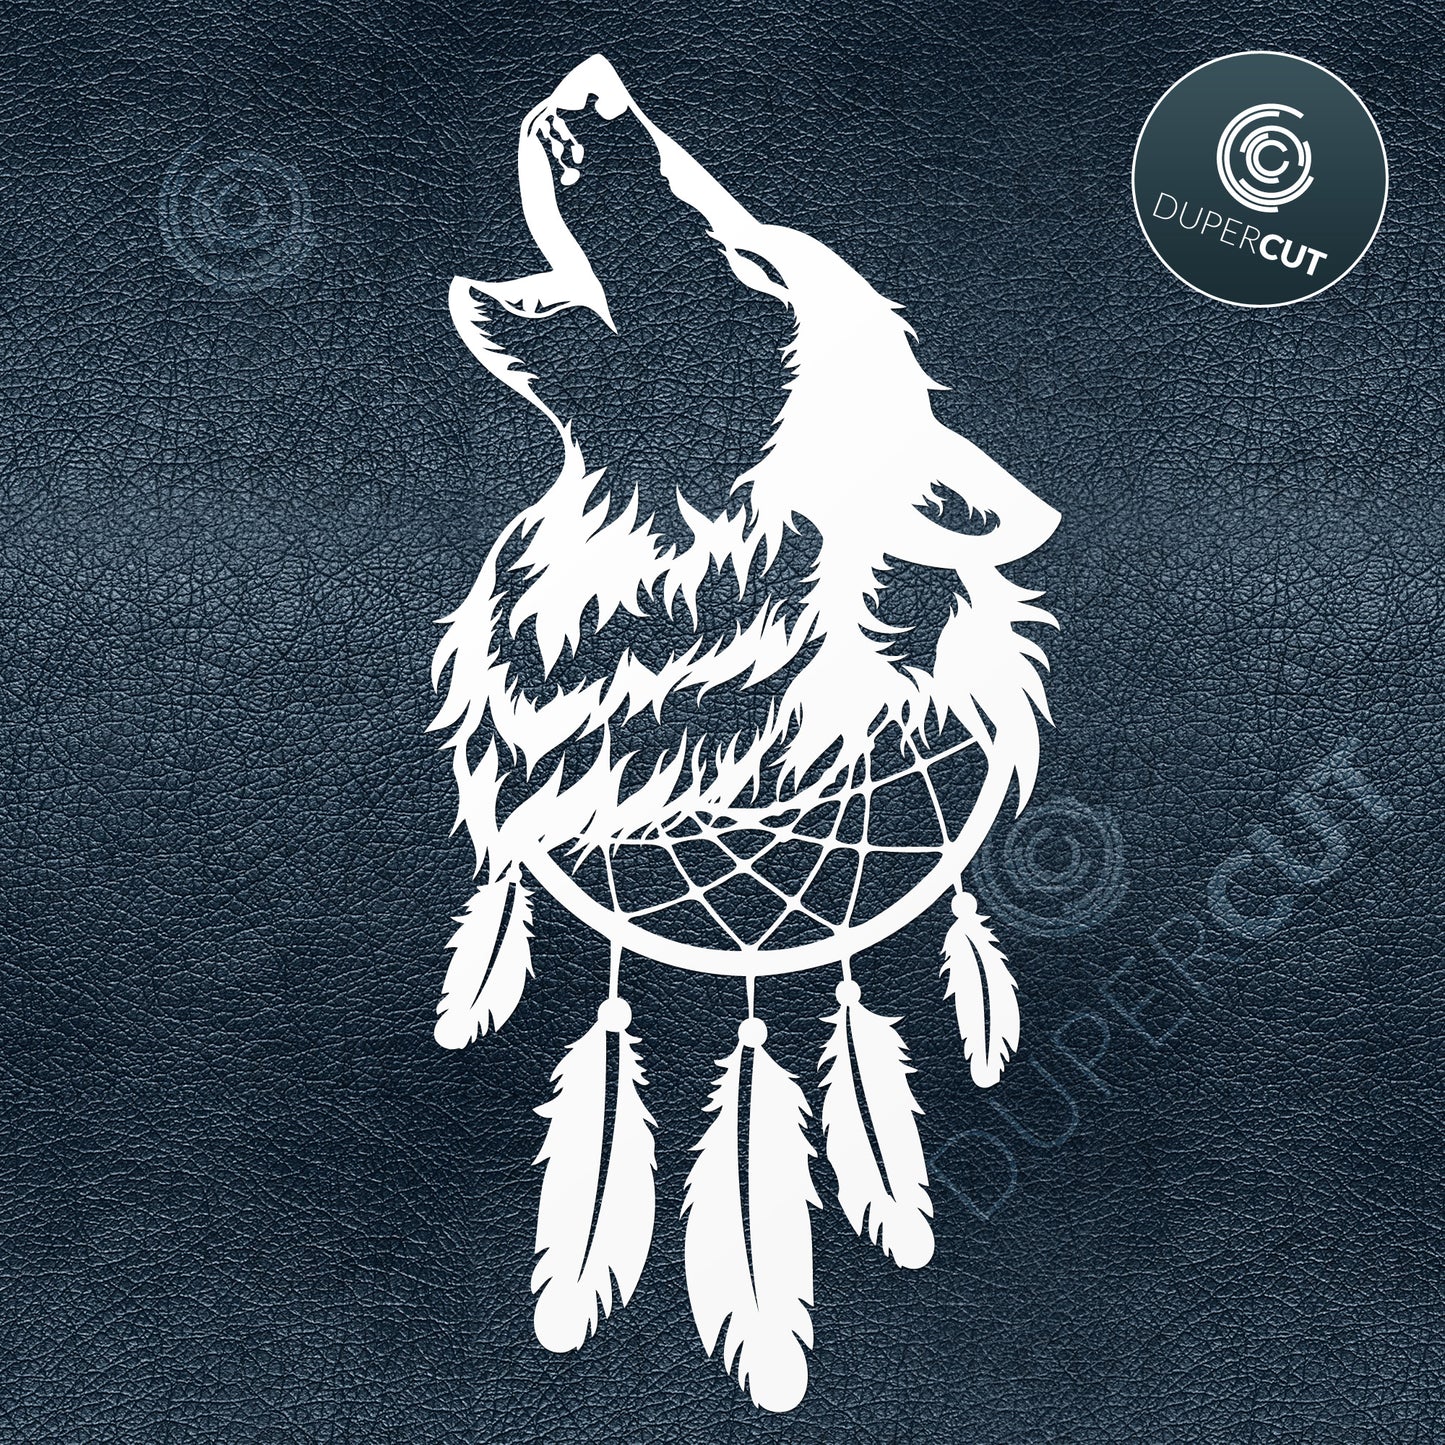 Howling wolf with native american dreamcatcher. Paper cutting template SVG PNG DXF files. For DIY projects Cricut, Glowforge, Silhouette Cameo, CNC Machines.